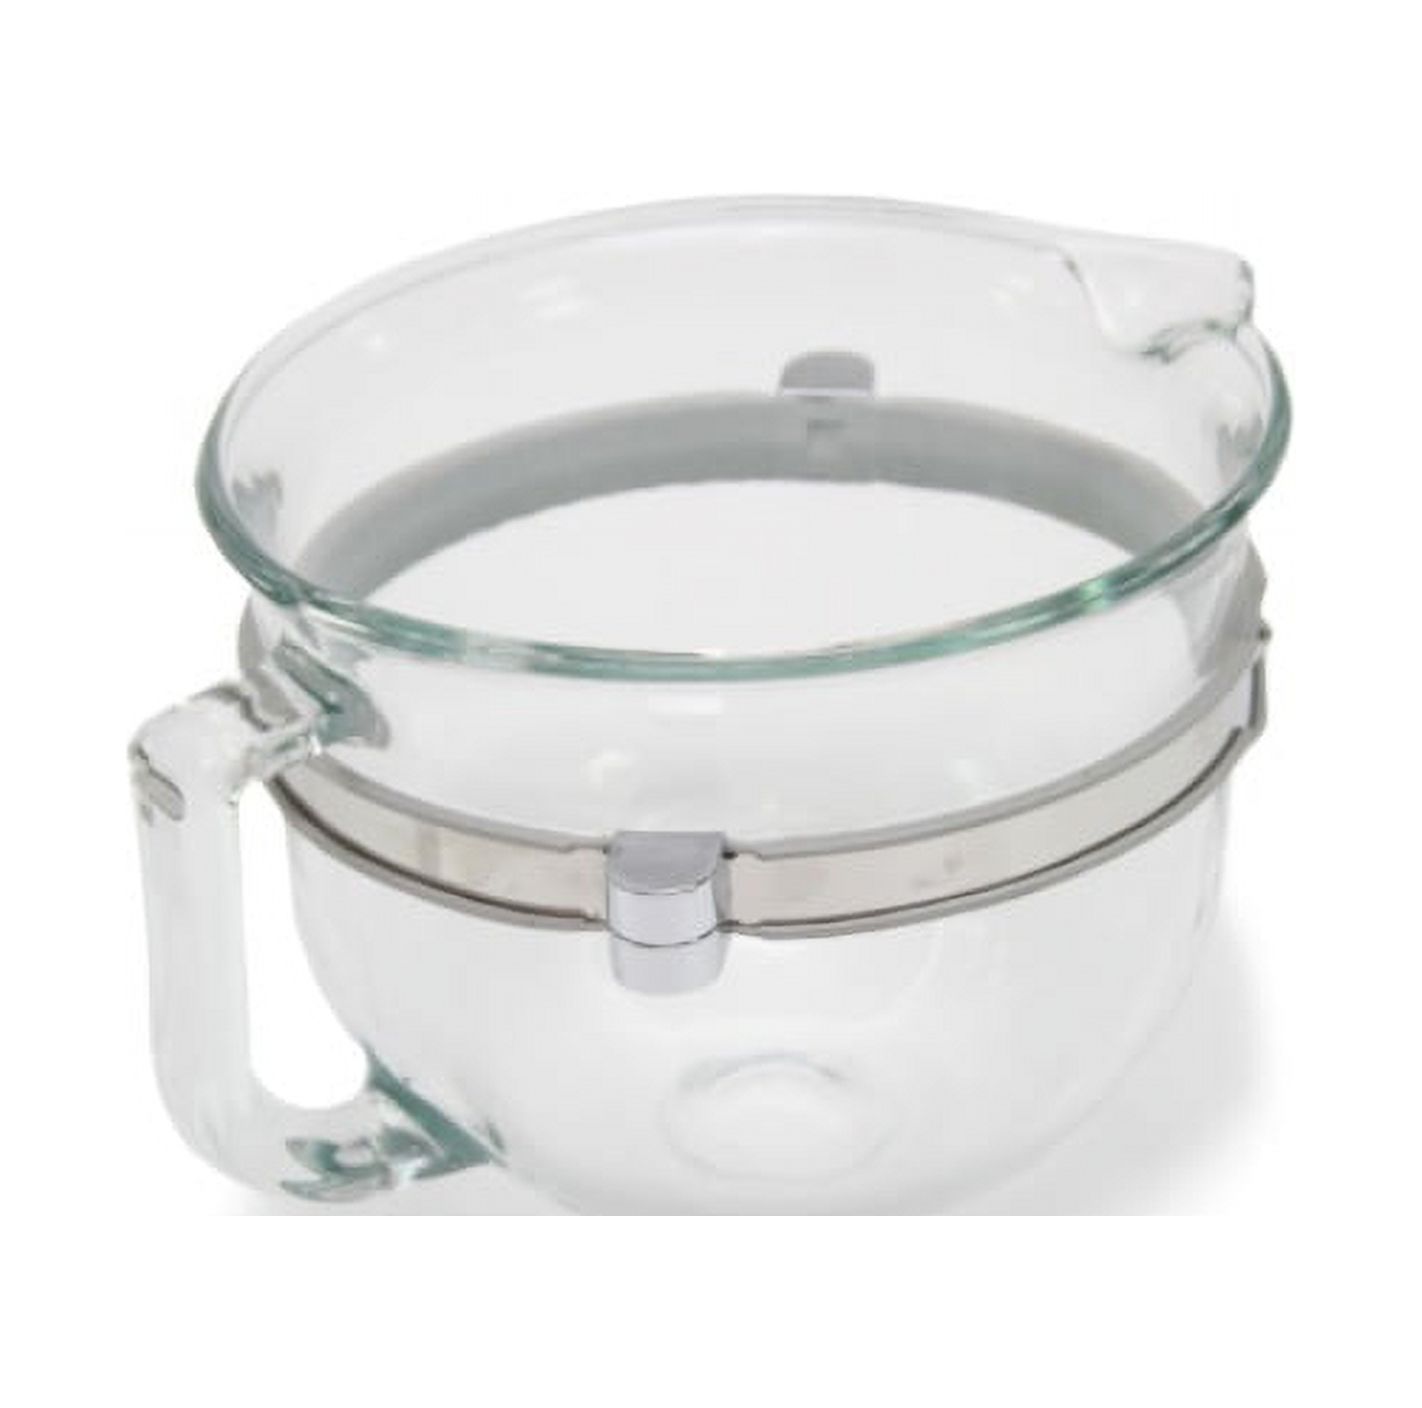 KitchenAid F Series 6 Quart Glass Bowl with Handle, Clear, KSMF6GBA - image 1 of 1